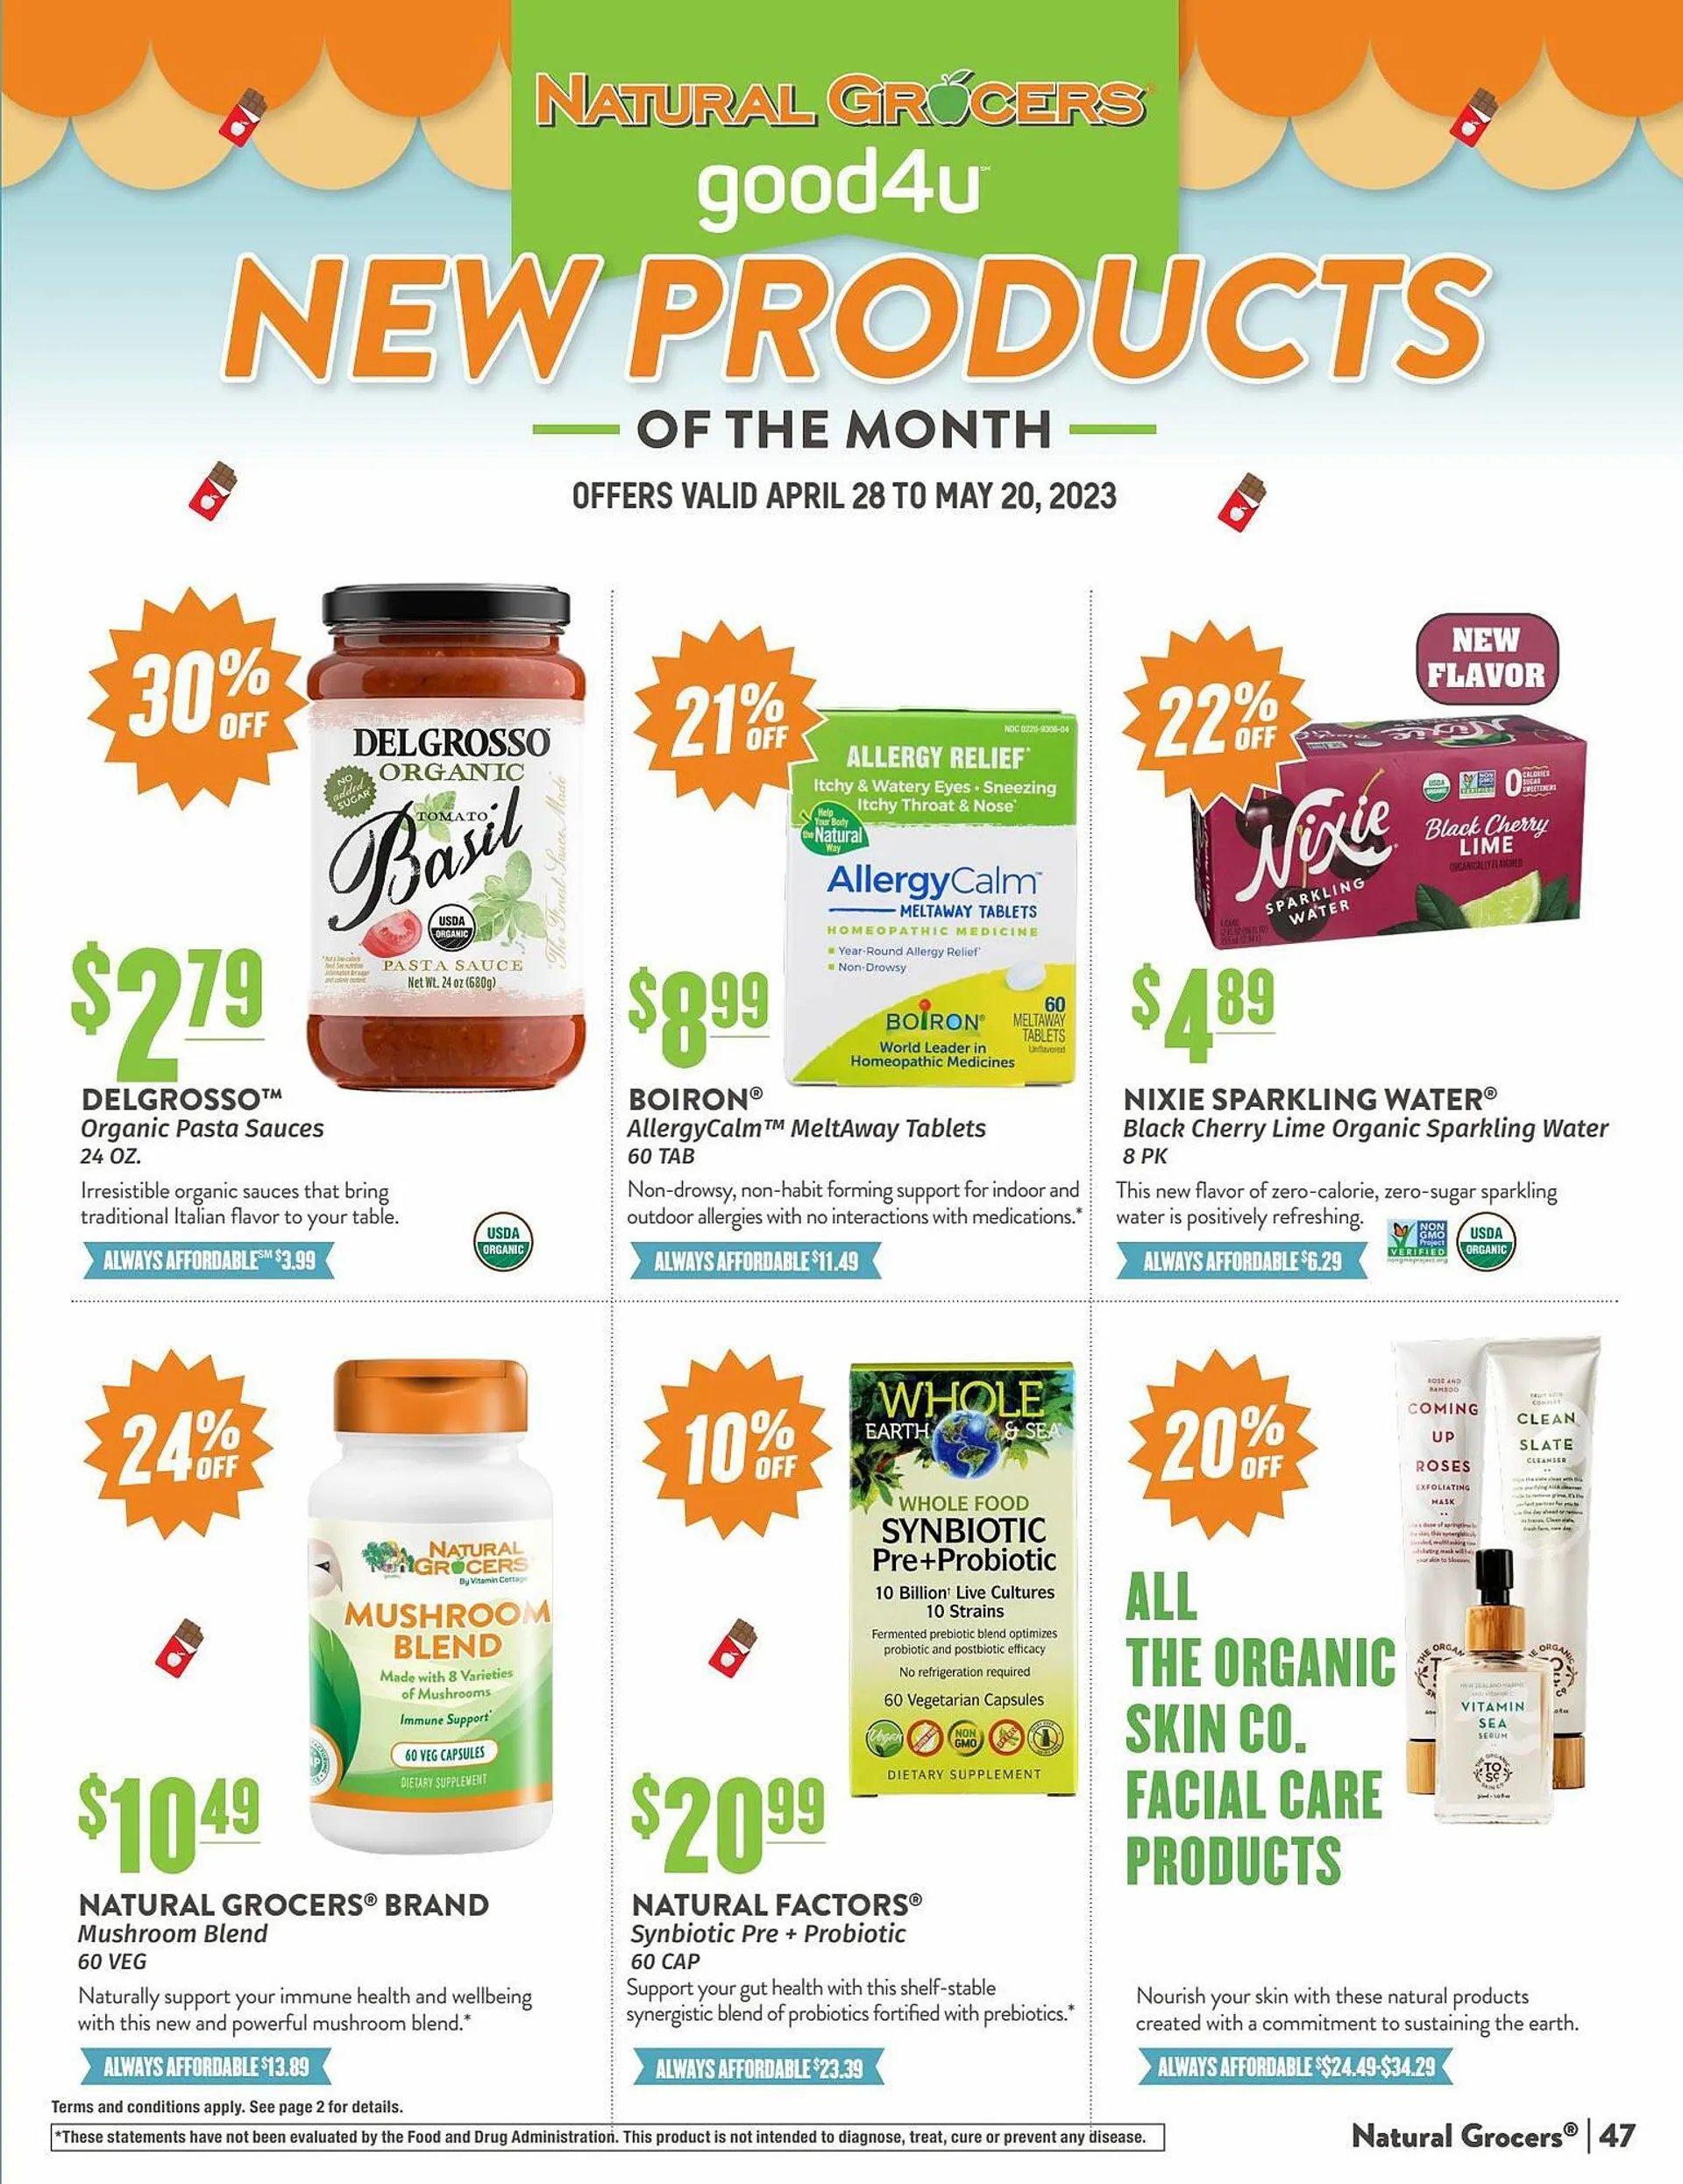 Natural Grocers ad - 47